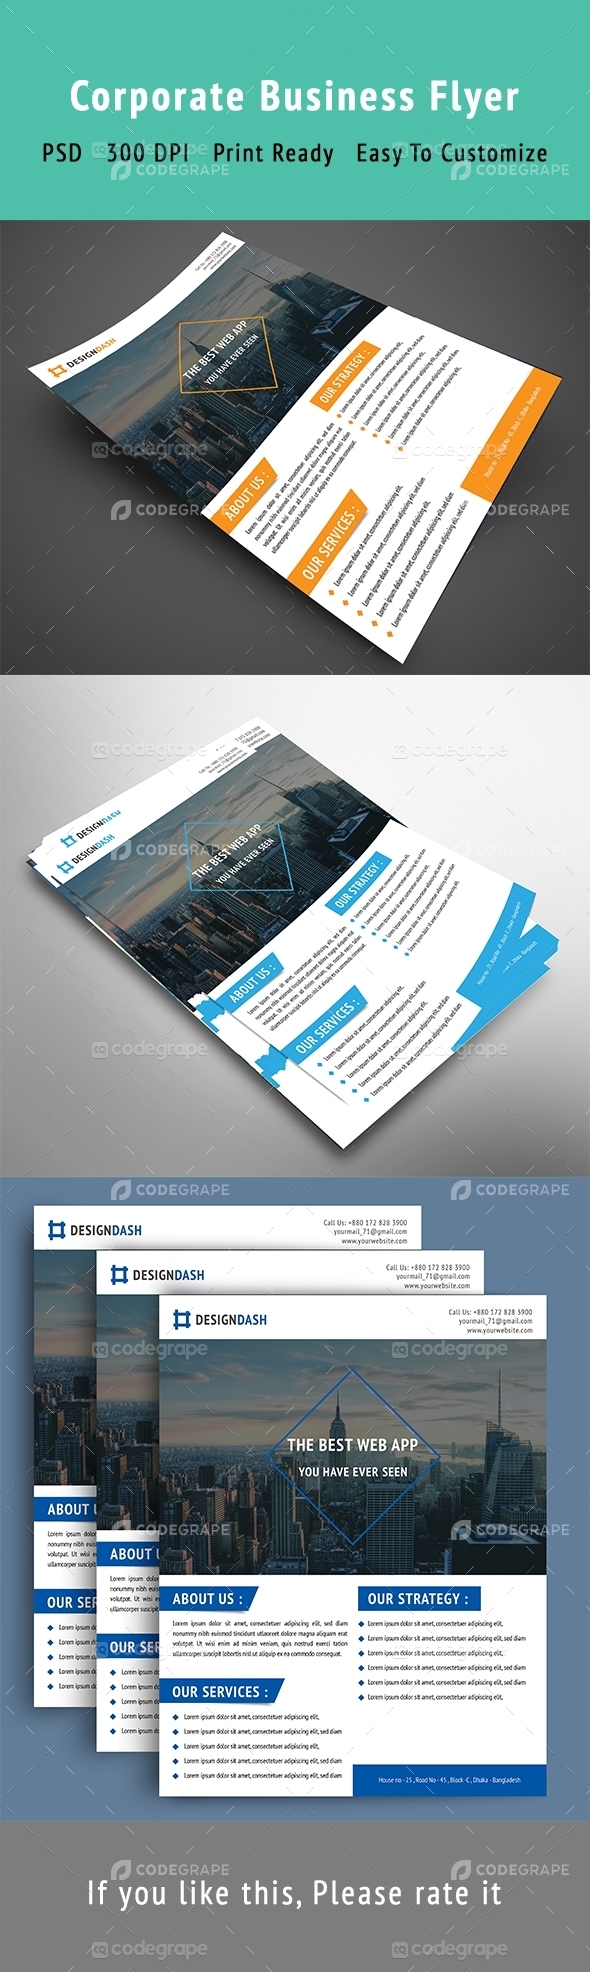 Corporate Business Flyer Vol_2